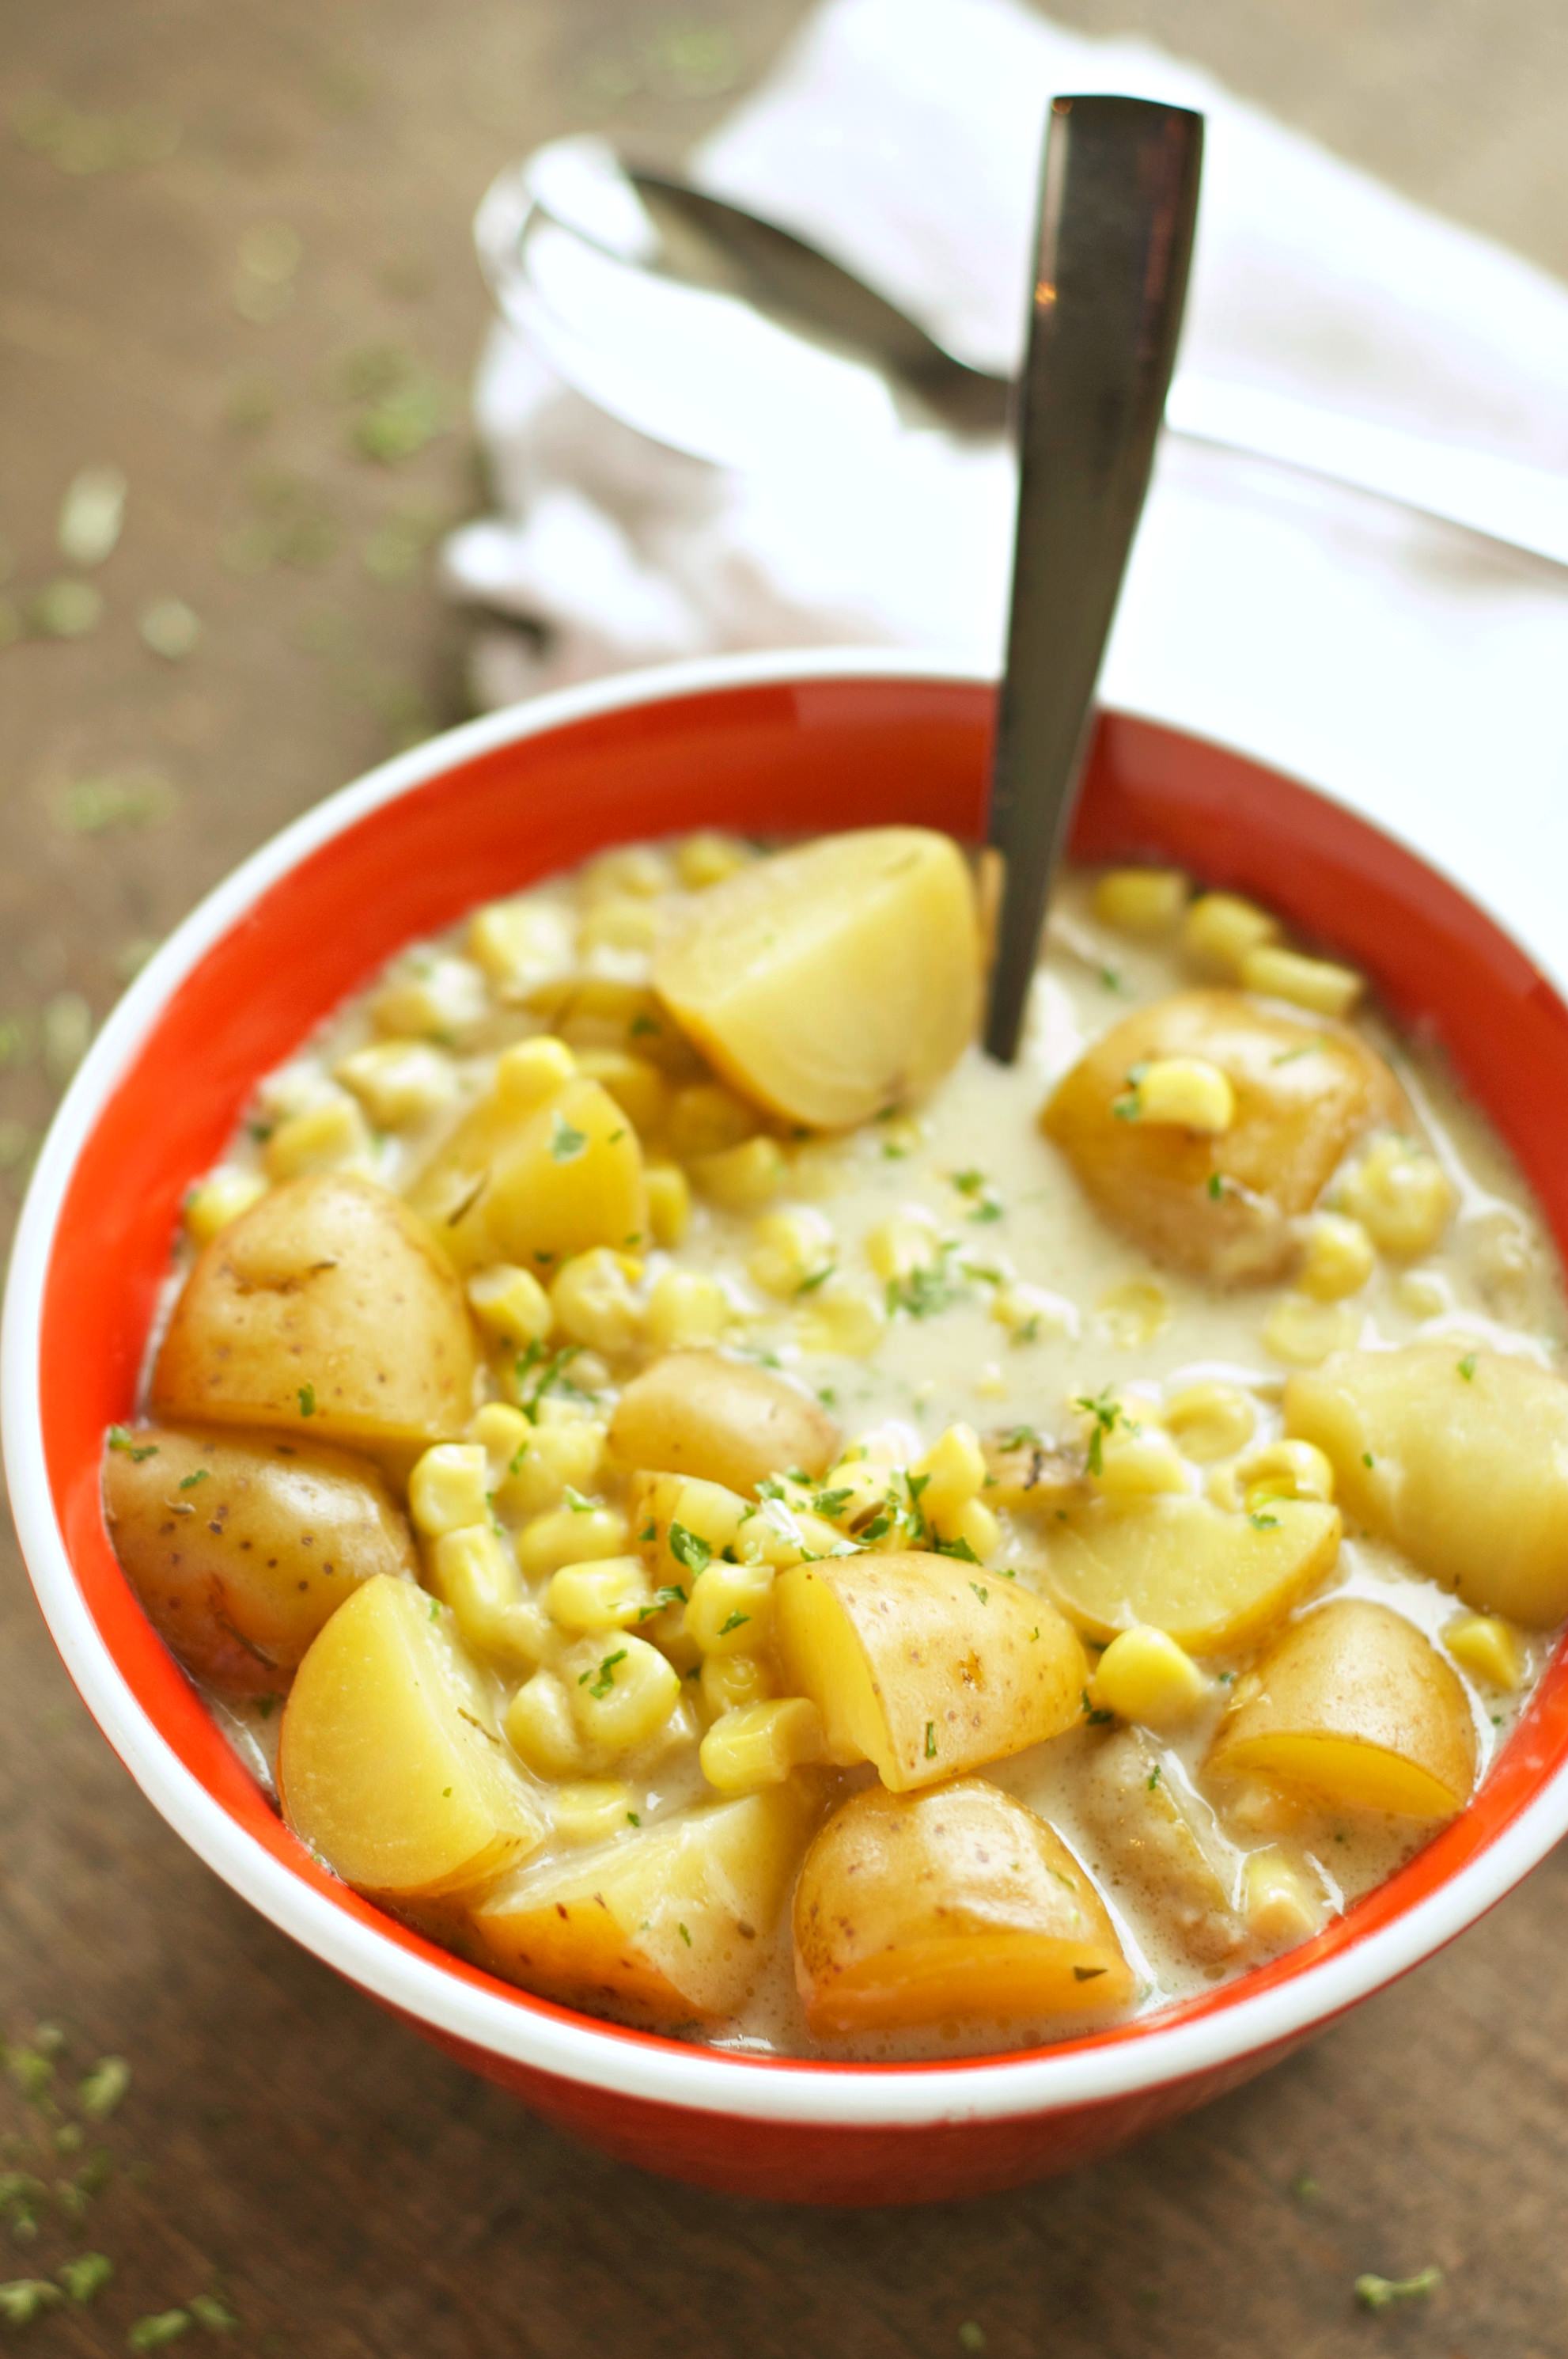 Slow Cooker Corn and Potato Chowder - Slow Cooker Gourmet